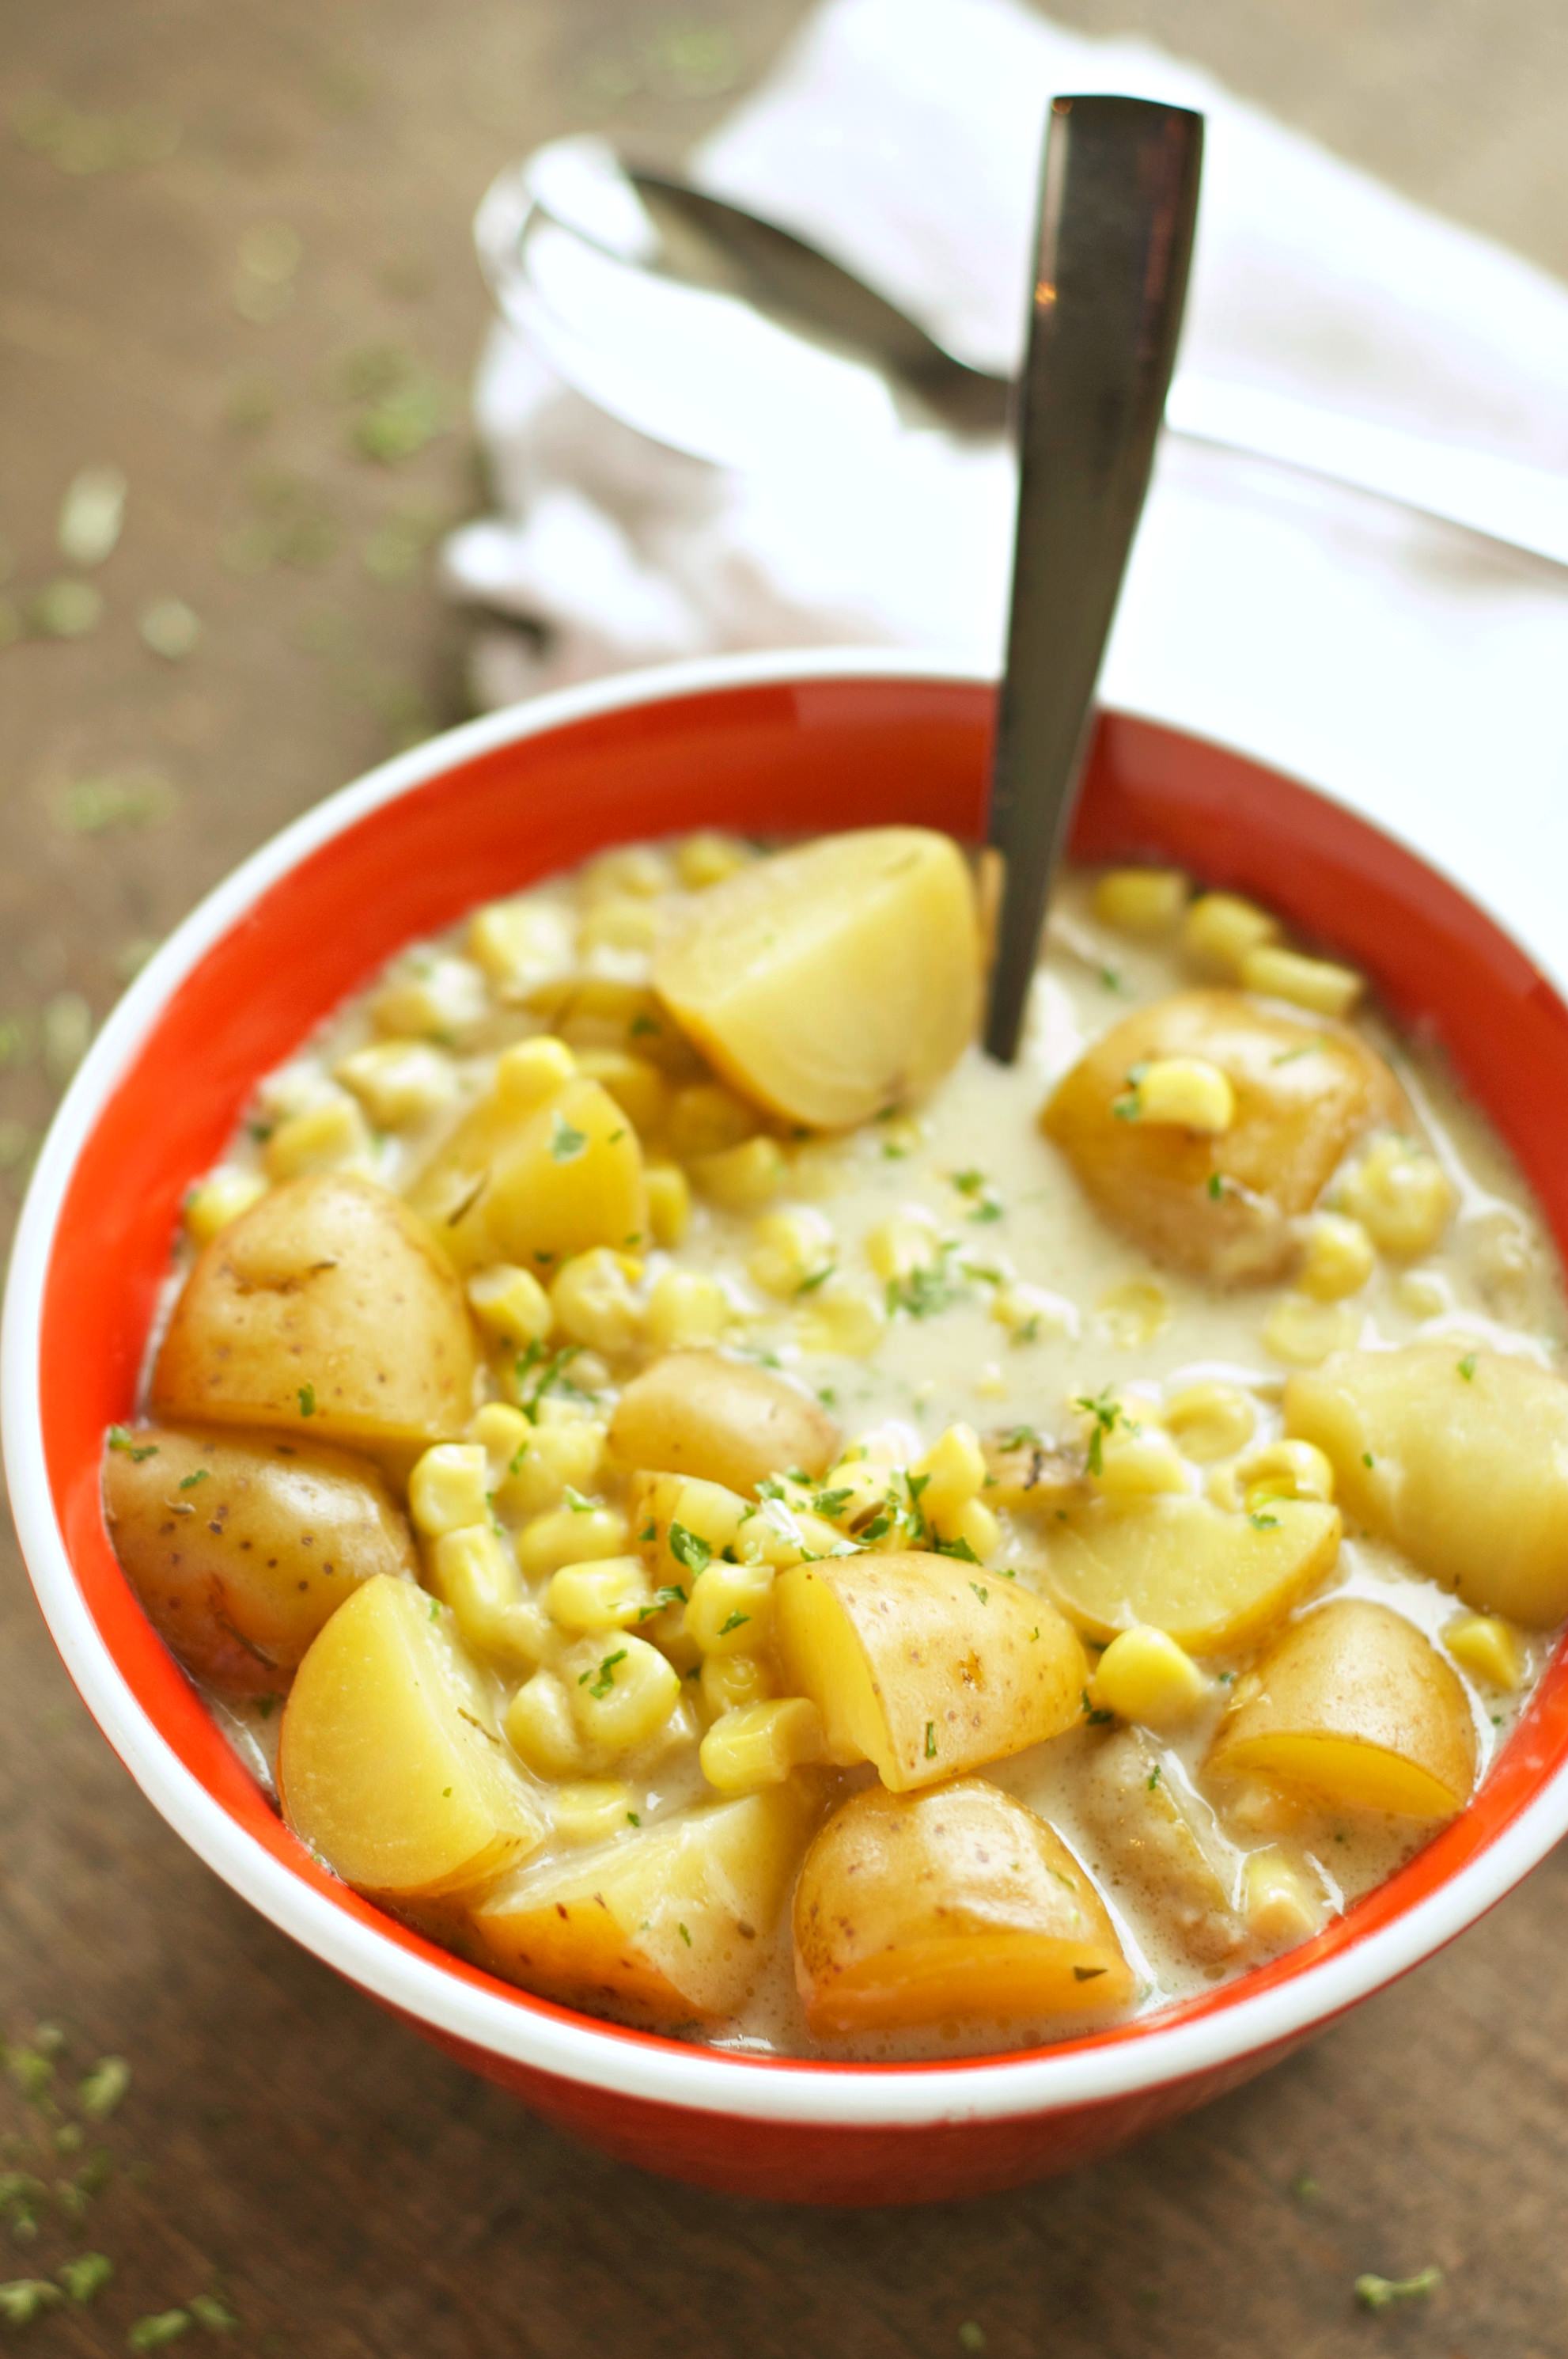 Slow Cooker Corn and Potato Chowder - Slow Cooker Gourmet